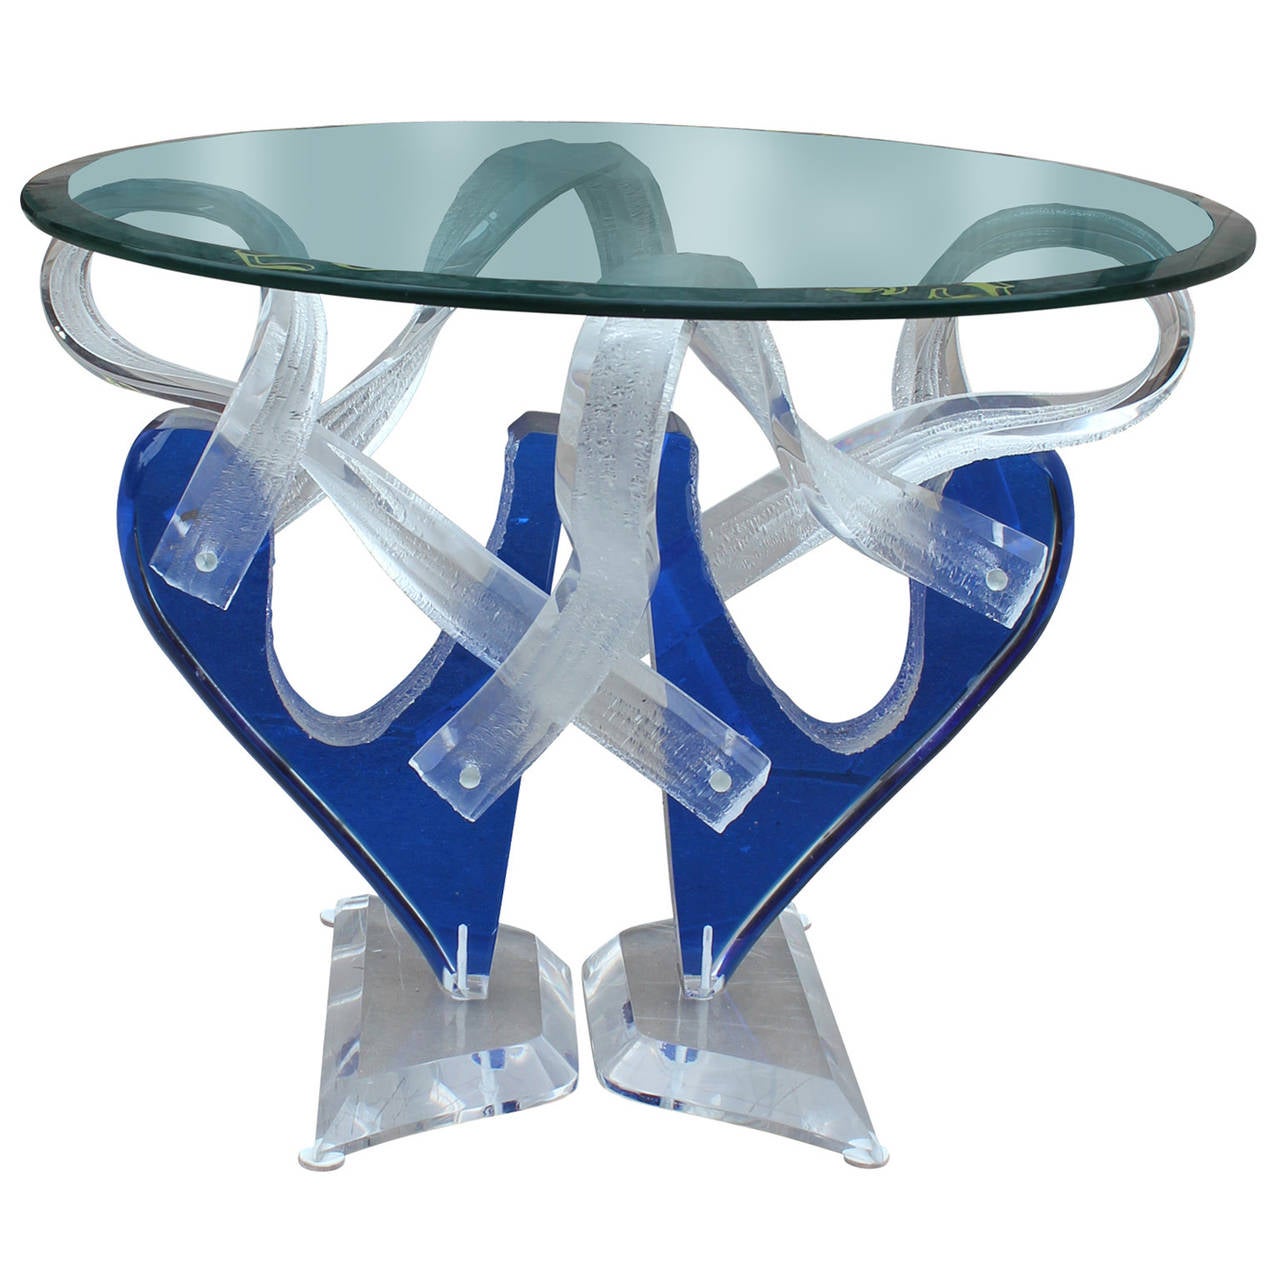 Fabulous pair of lucite side tables with glass tops and cobalt blue accents. Pedestal bases have a series of organic curves and curls.  Possibly Haziza

Matching Coffee Table available.